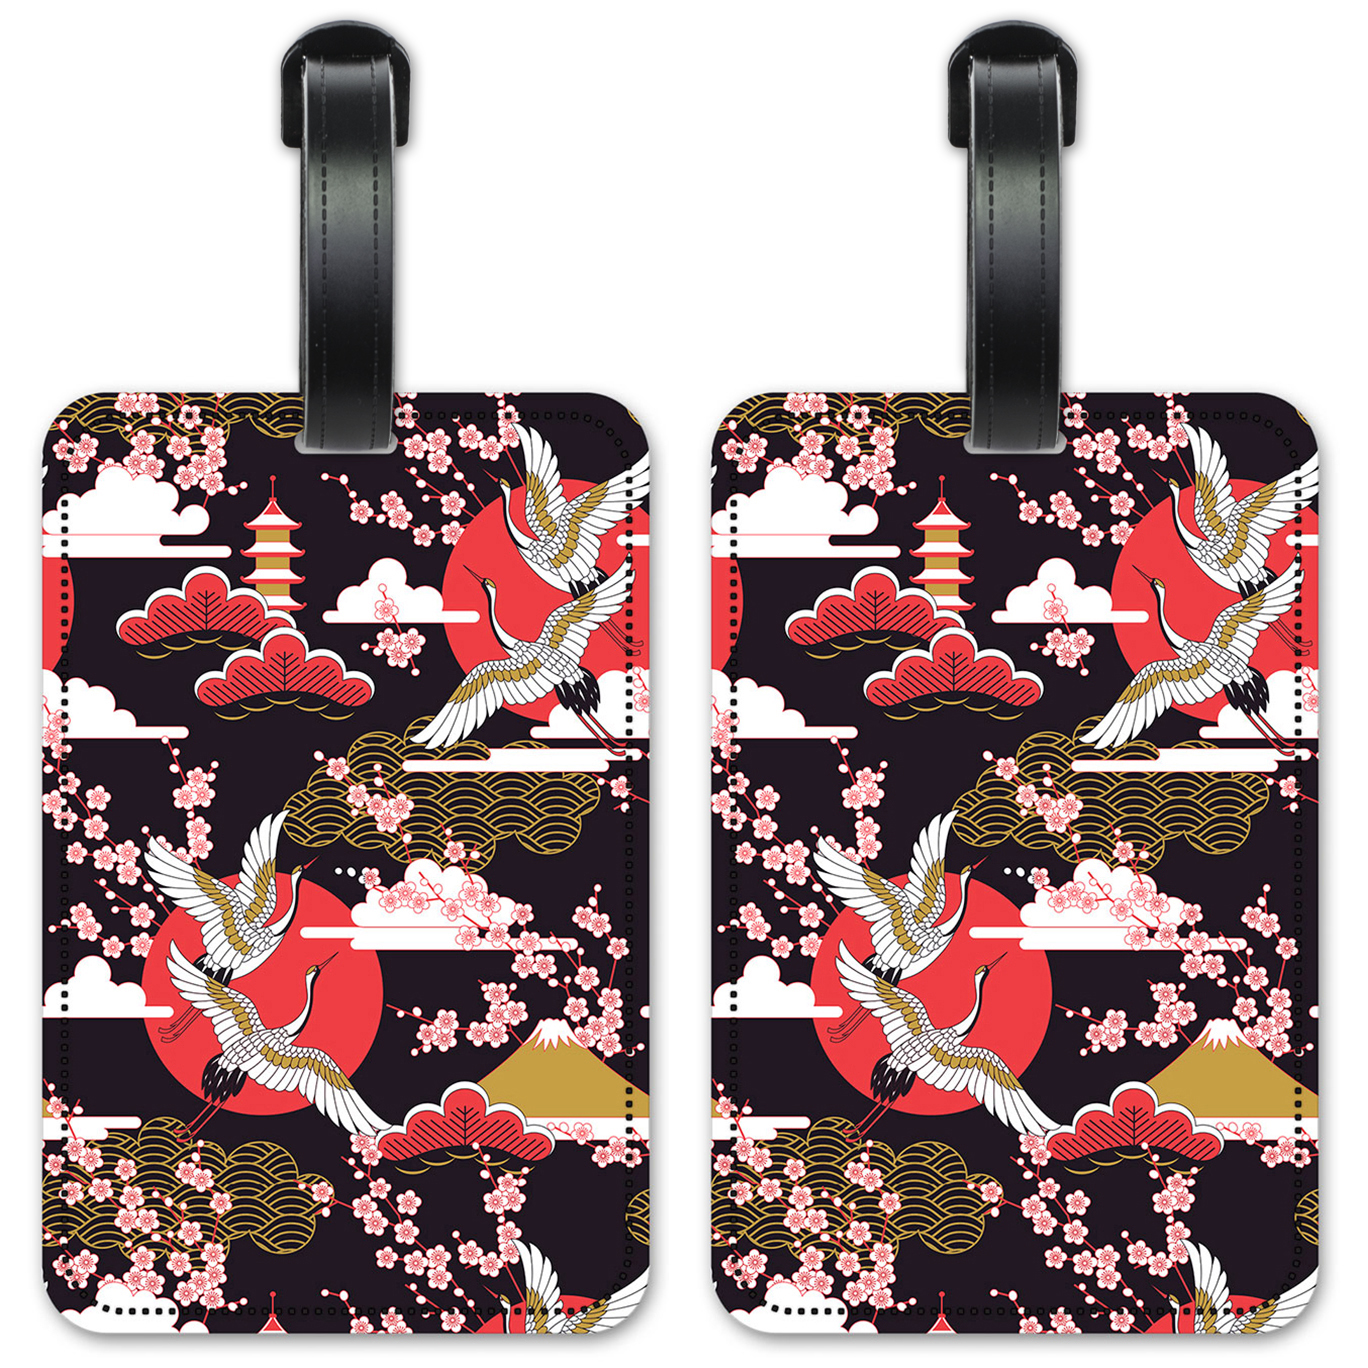 Red, White & Gold Flying Cranes - #2786